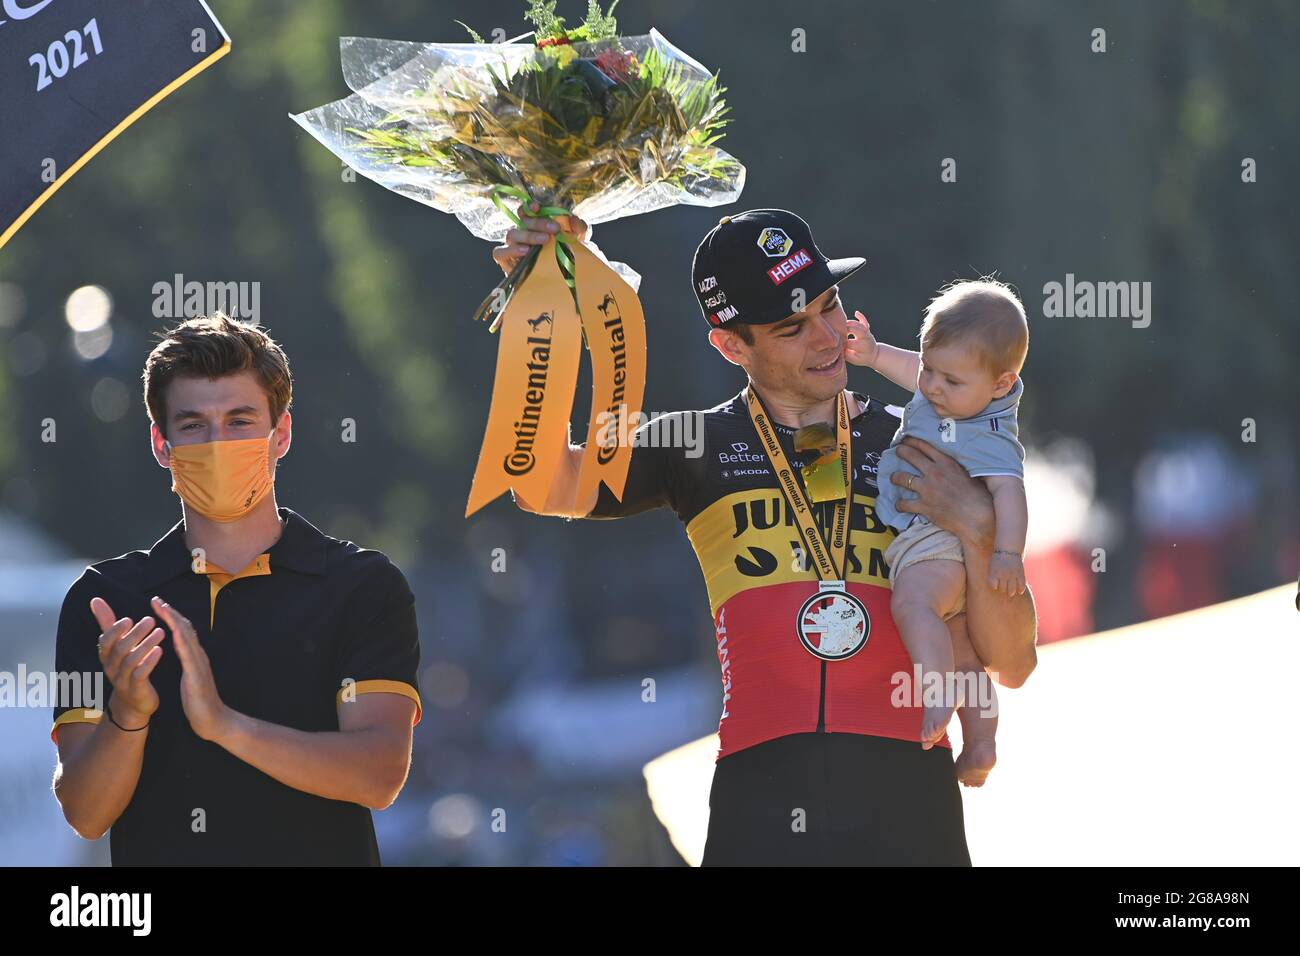 VAN AERT Wout (BEL) of JUMBO - VISMA wins the Stage 21 in a sprint finish for the final day of racing in the Tour de France, Sunday 18th July, 2021. Photo credit should read:Pete Goding/GodingImages Stock Photo